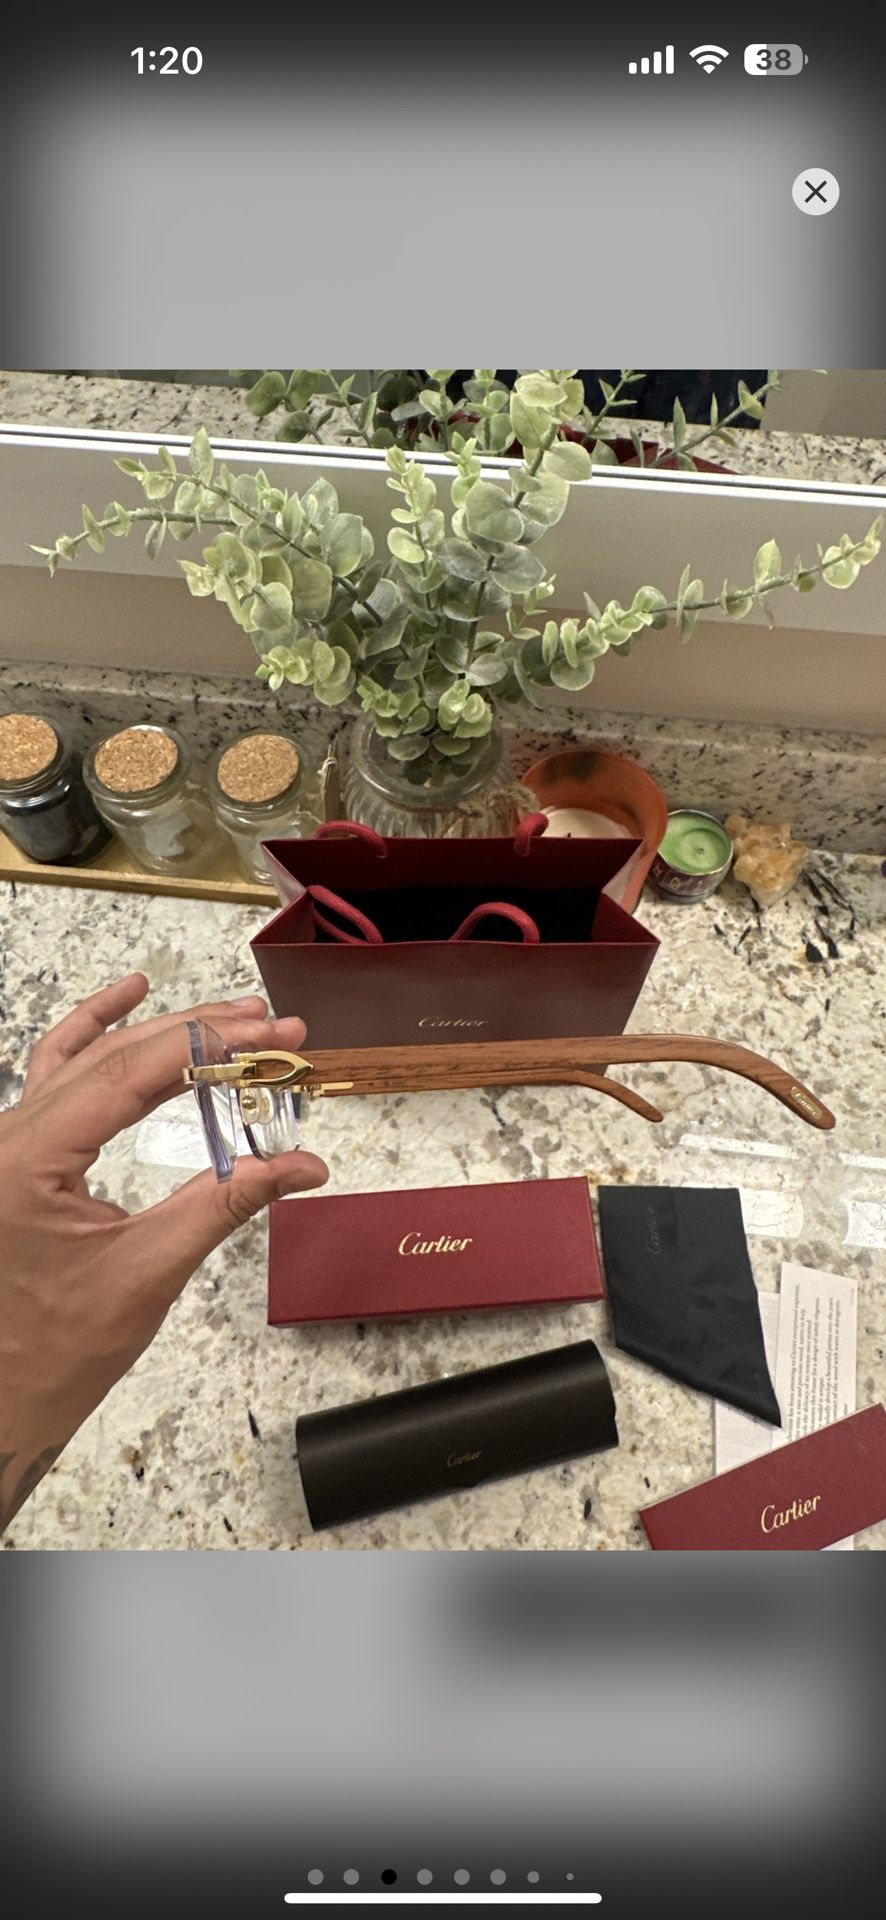 Cartier Wood Glasses (CT0052O) for Sale in Tampa, FL - OfferUp